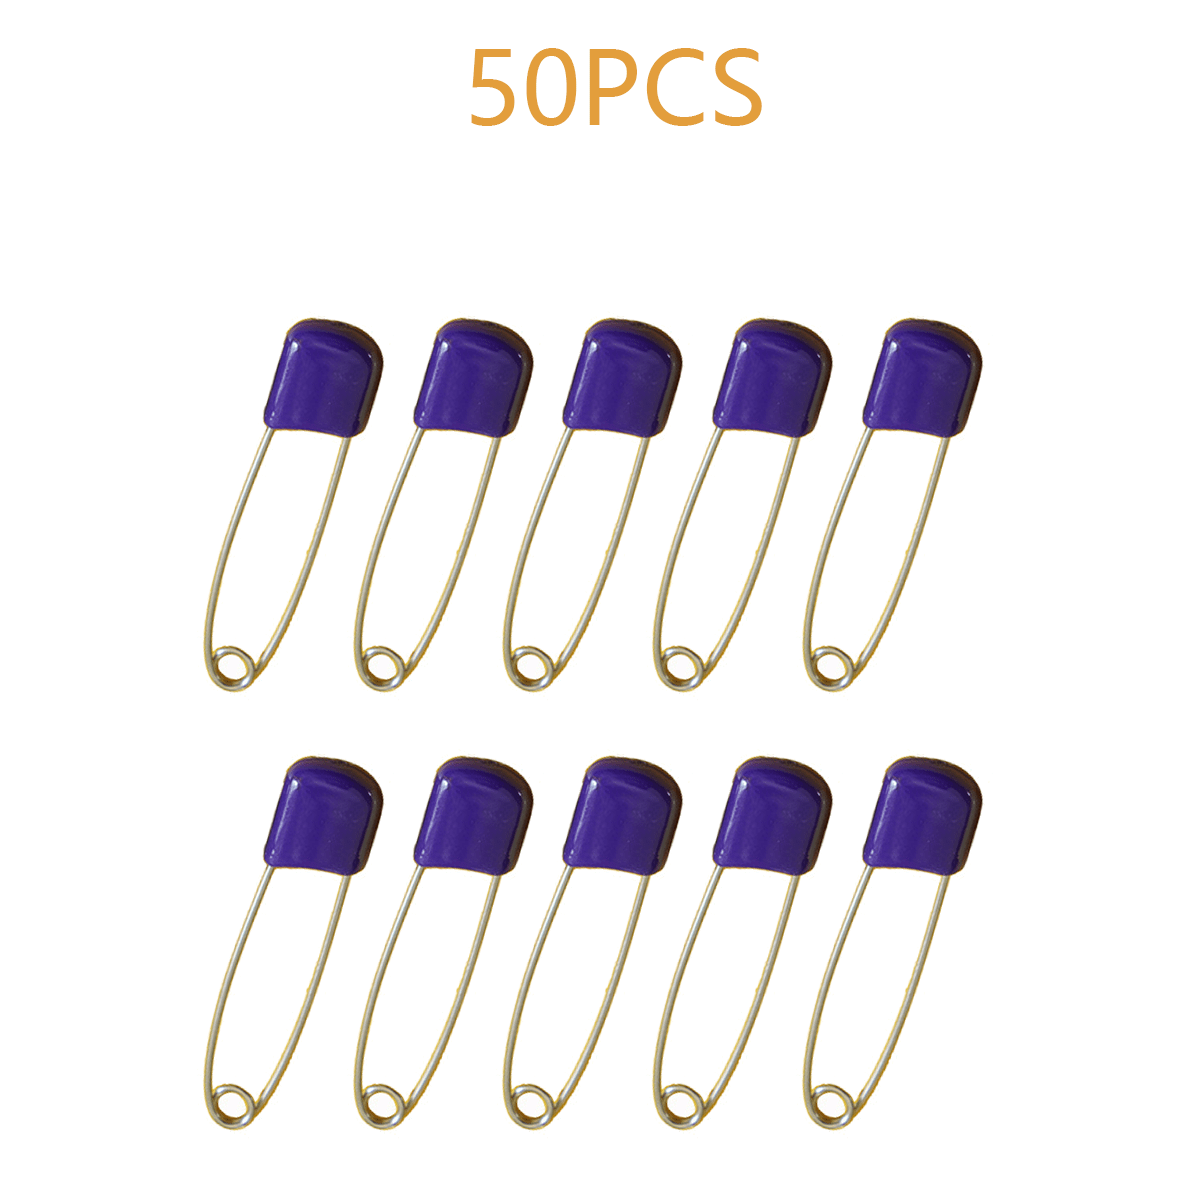 OsoCozy Cloth Diaper Nappy Pins 100 Packs - 100 Stainless Steel Safety Pins  with Locking Plastic Heads. Durable, Safe and Cute 2.2 Inches Long, Diaper  Pins For Cloth Diapers 